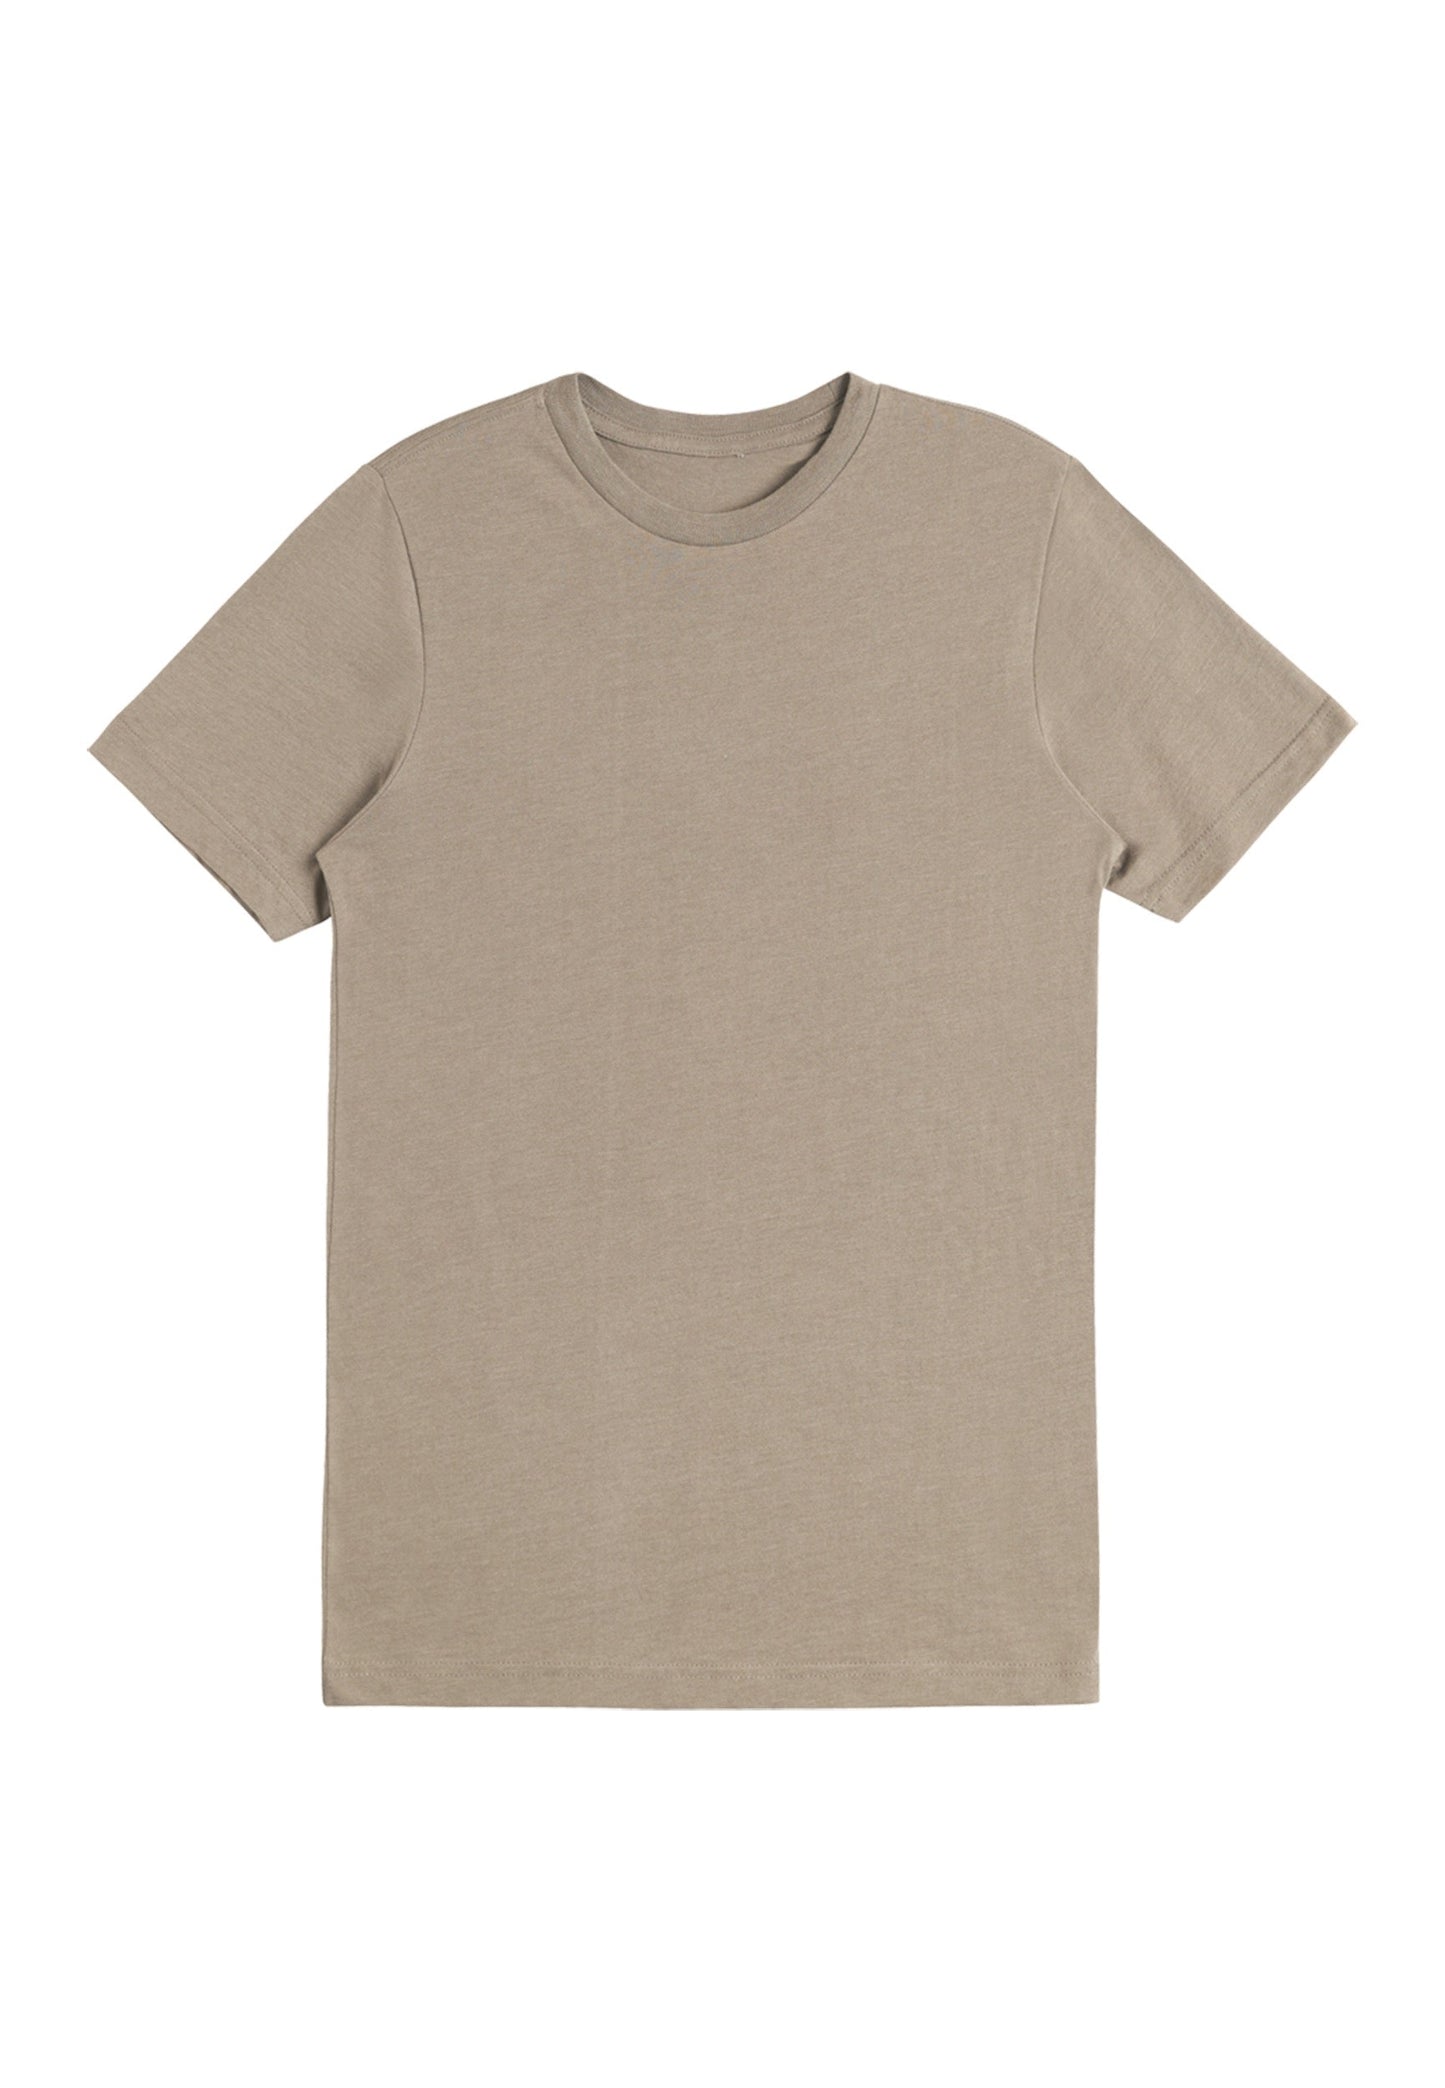 Soft Heather Tees 2-Pack "Olive" and "Brown"